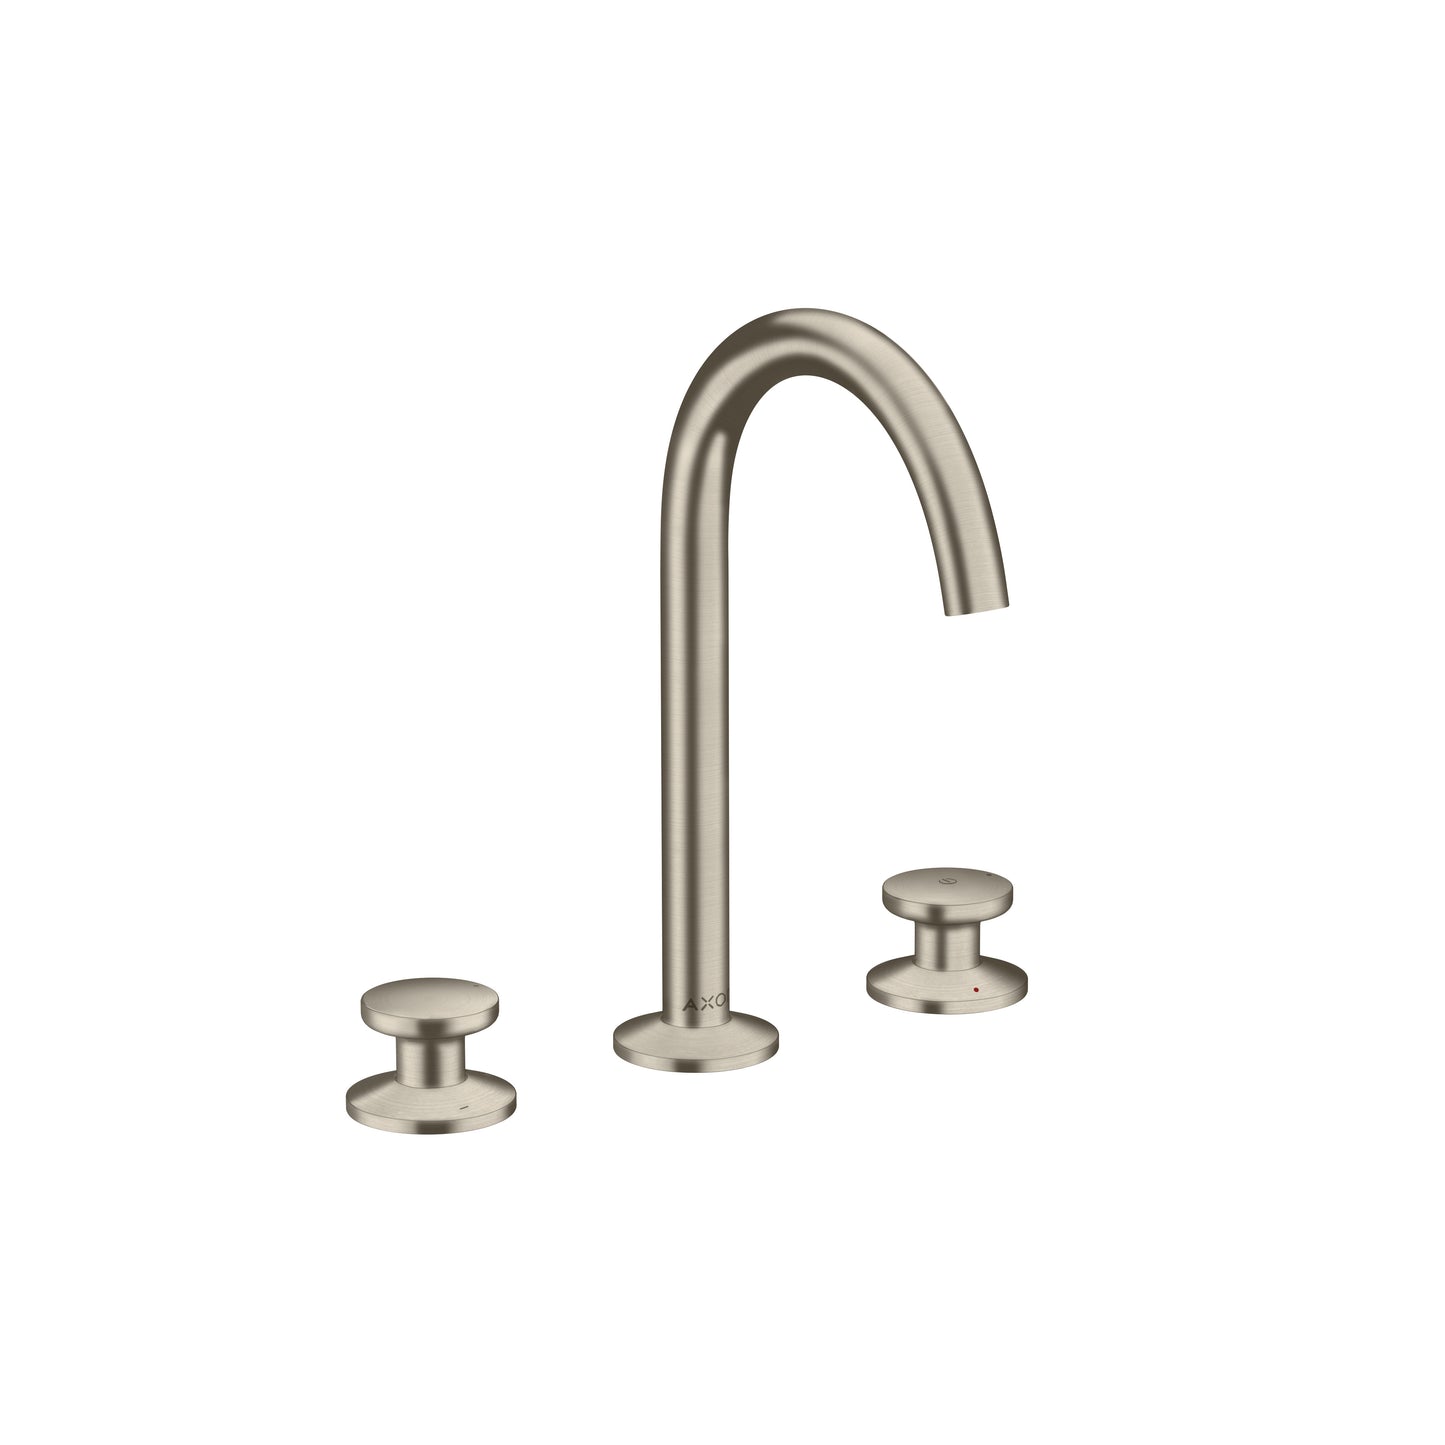 AXOR 48070821 Brushed Nickel ONE Modern Widespread Bathroom Faucet 1.2 GPM